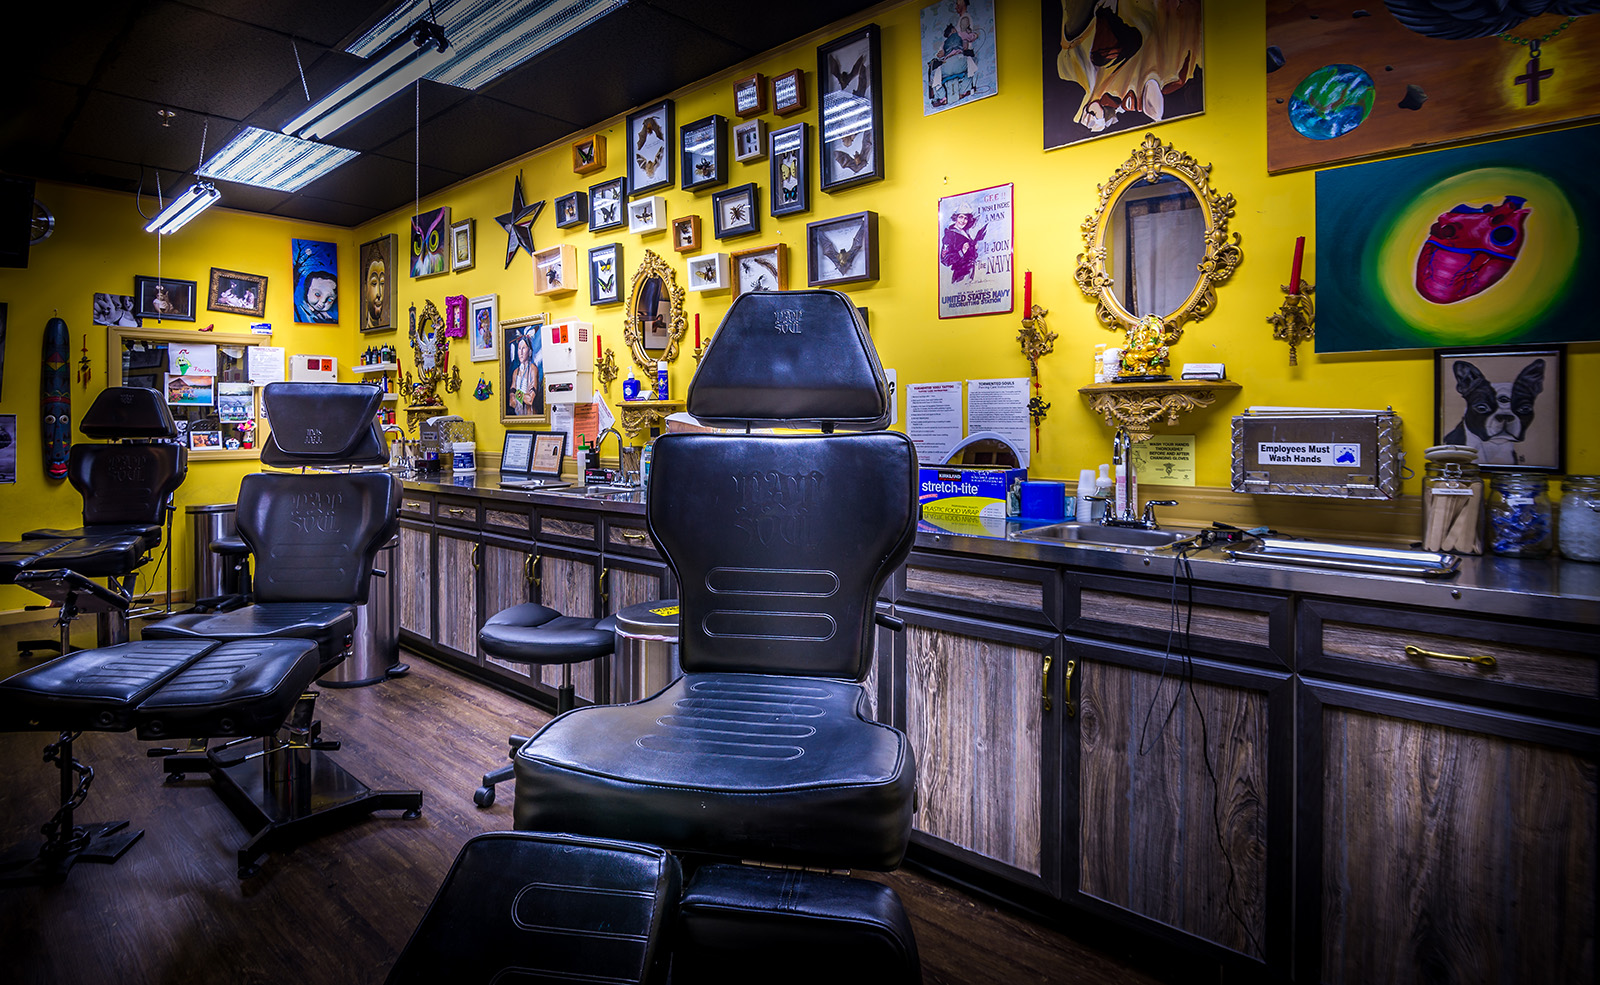 What to Avoid when Looking for a Tattoo Shop - Tormented Souls